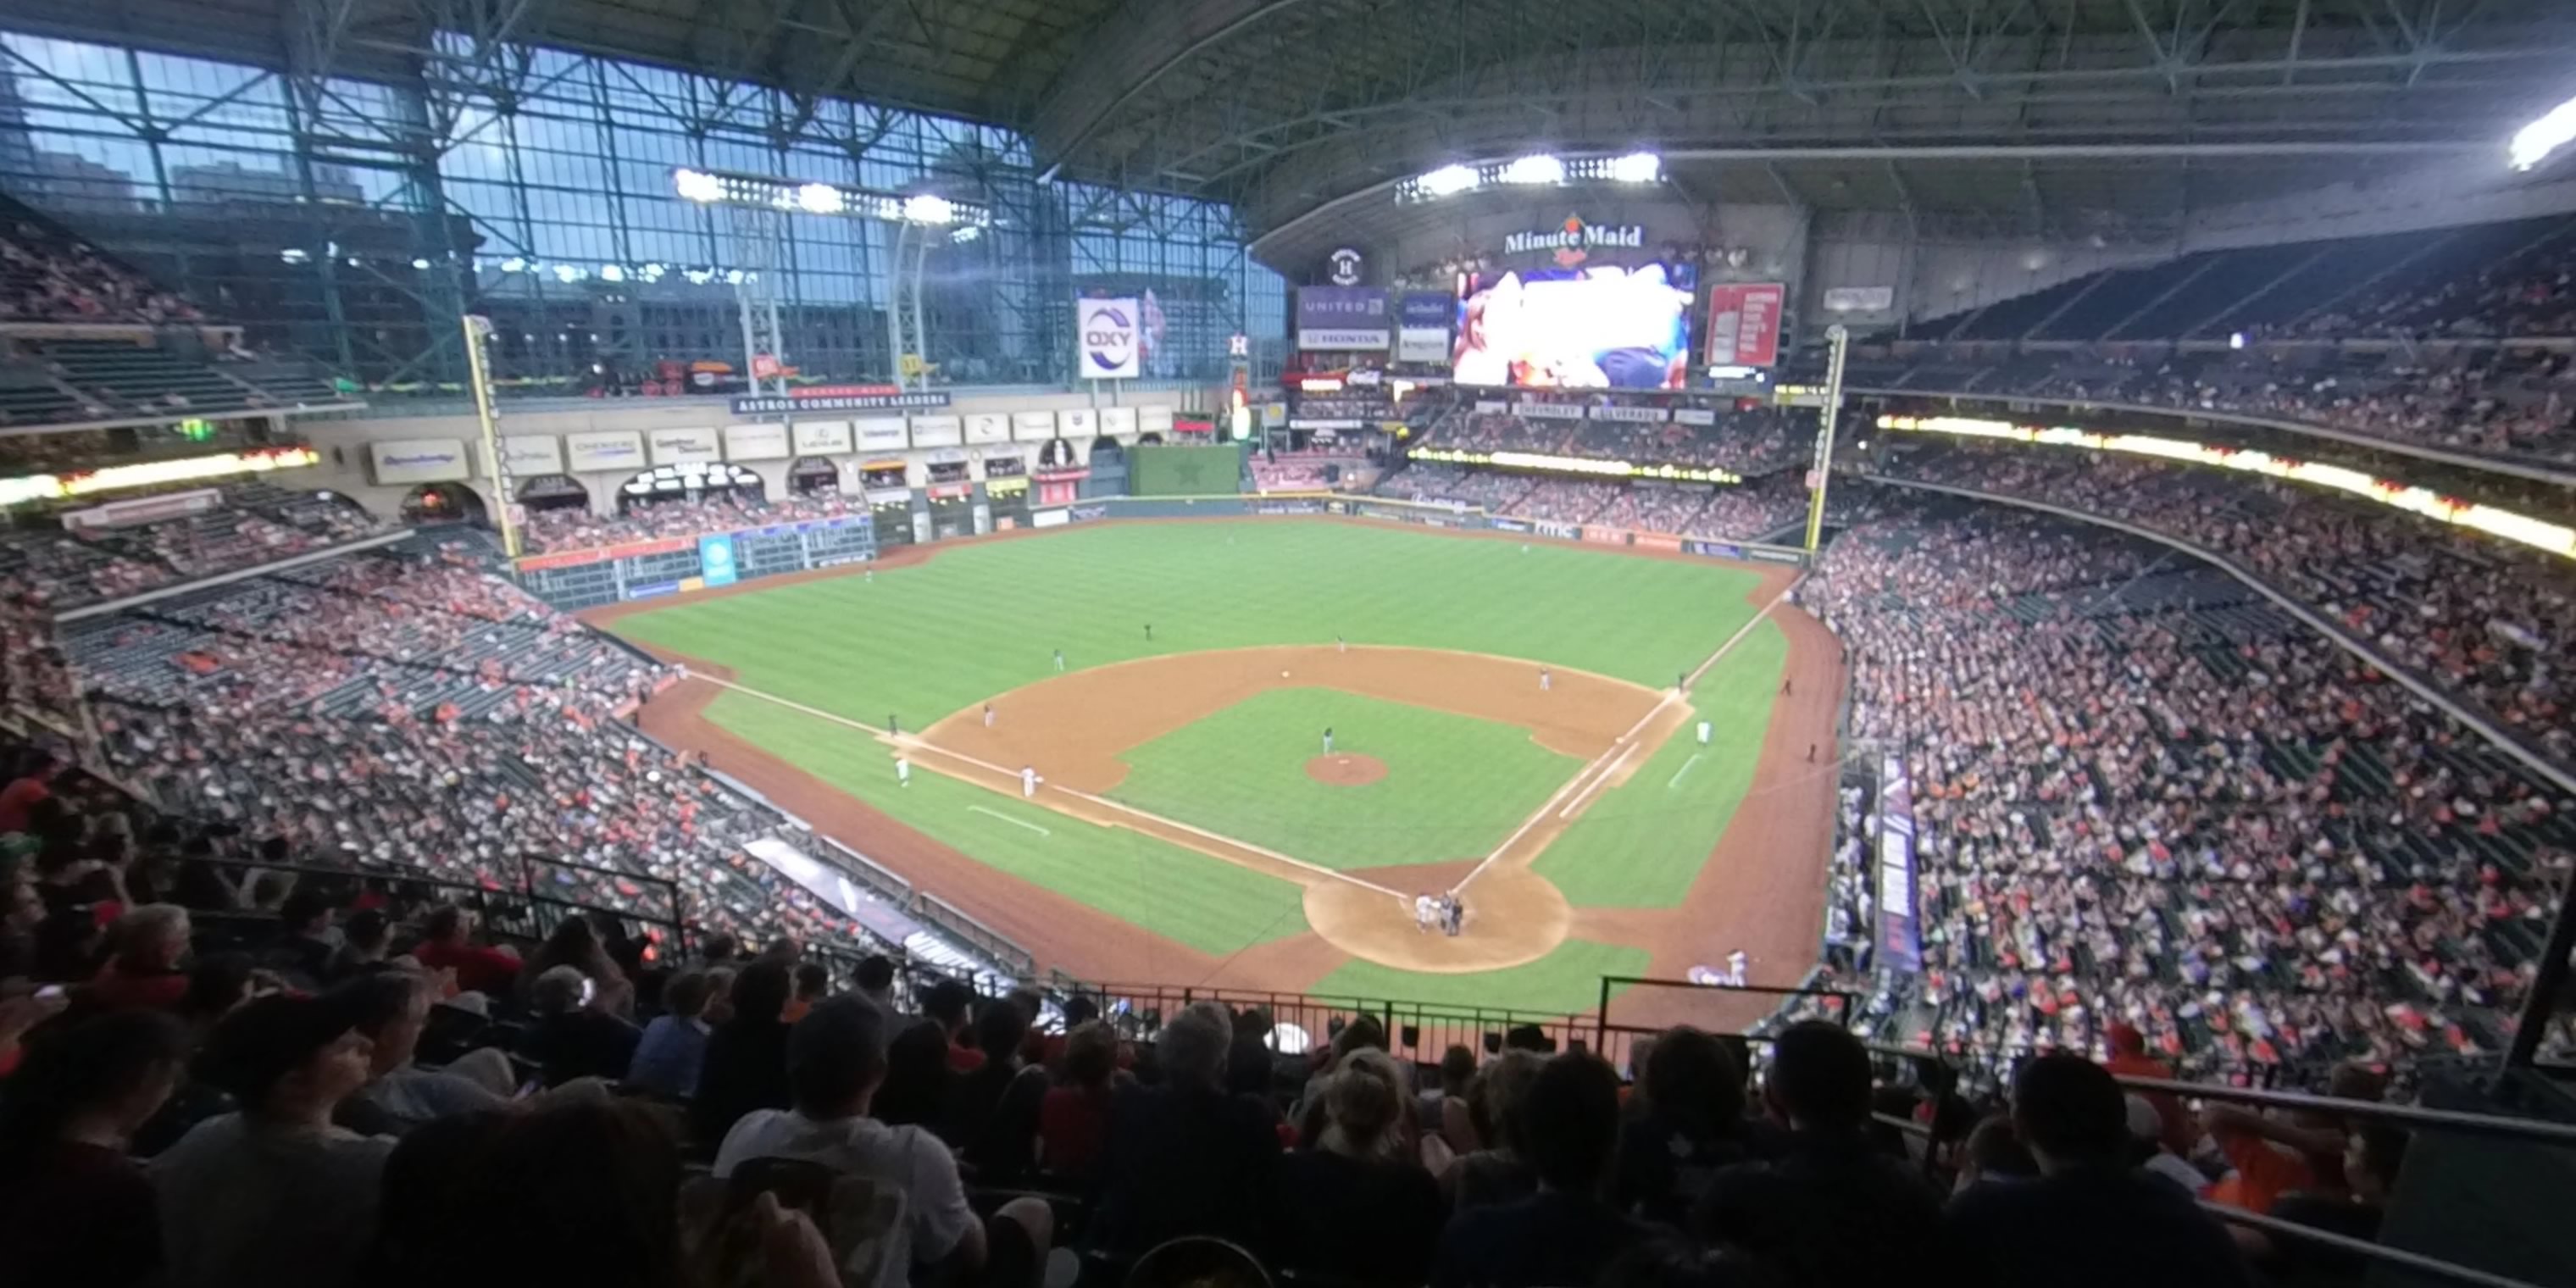 section 317 panoramic seat view  for baseball - minute maid park